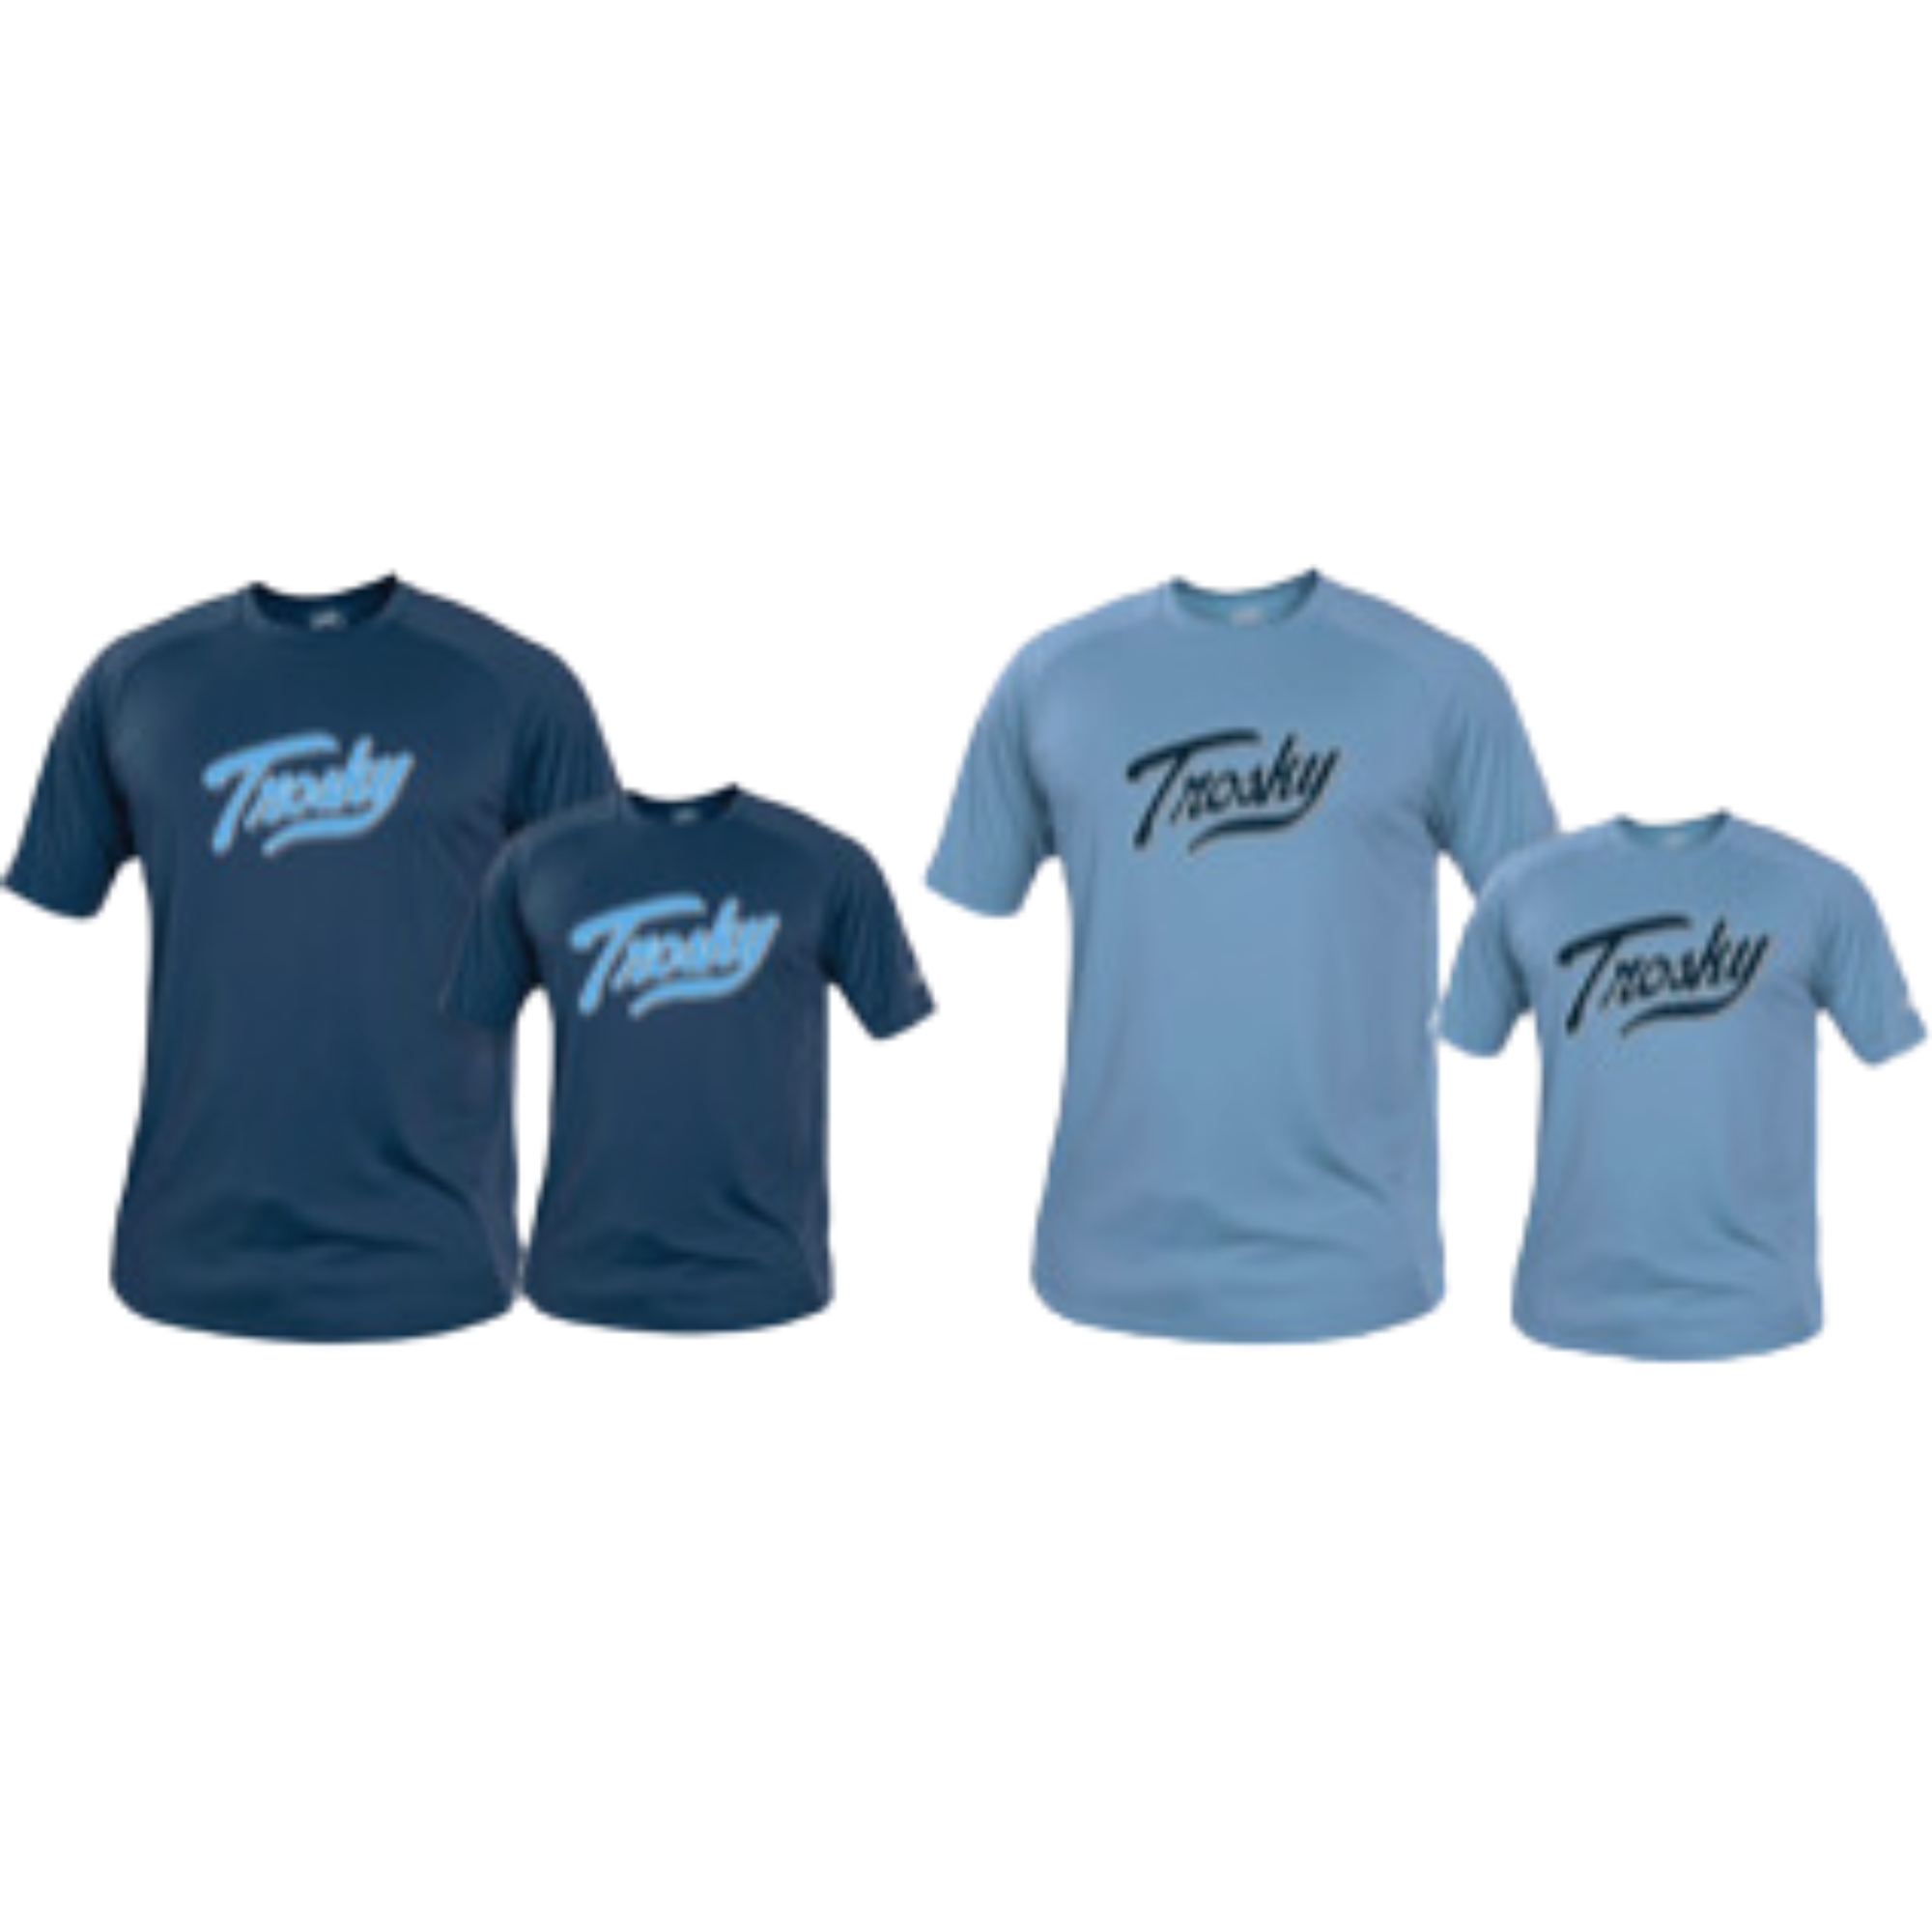 Rawlings Youth Trosky Fan Gear Numbered Performance Tee (set of 2 Col. Blue & Navy) - YL